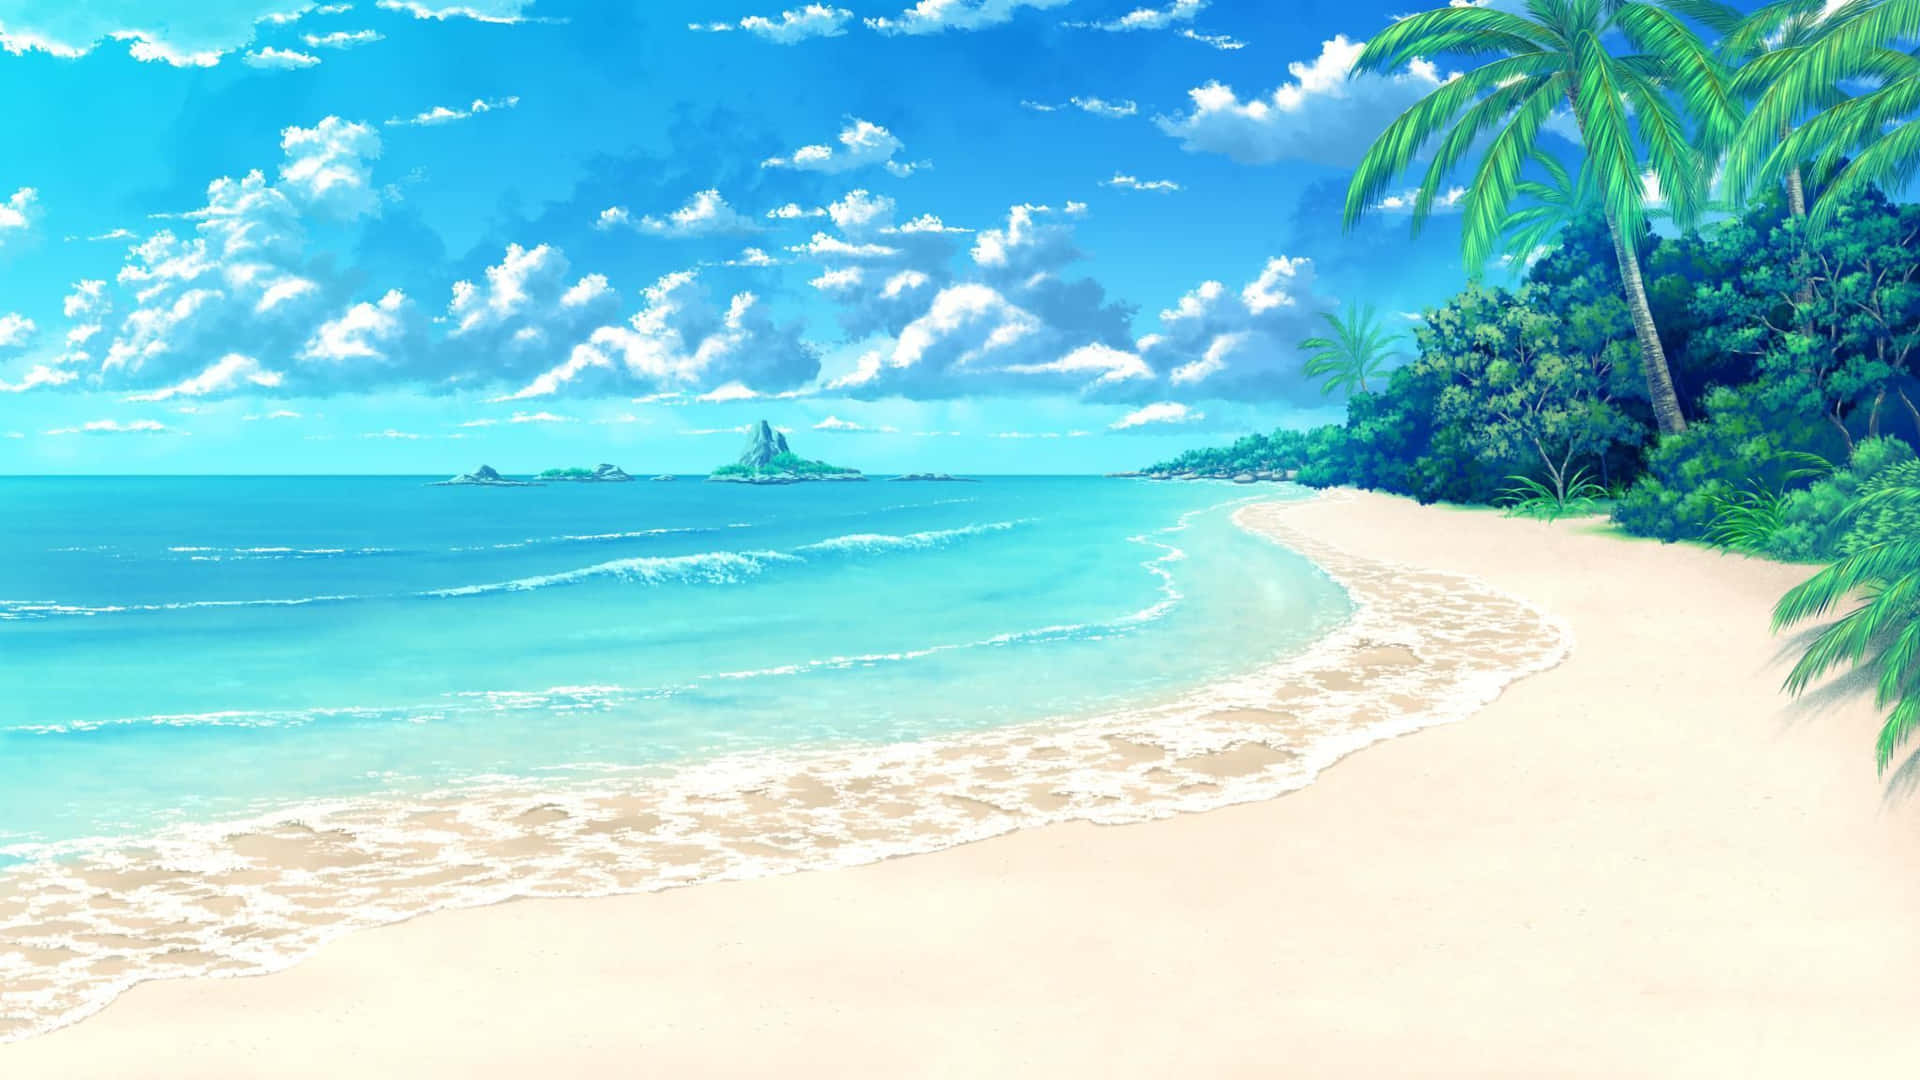 A Painting Of A Beach With Palm Trees And Blue Sky